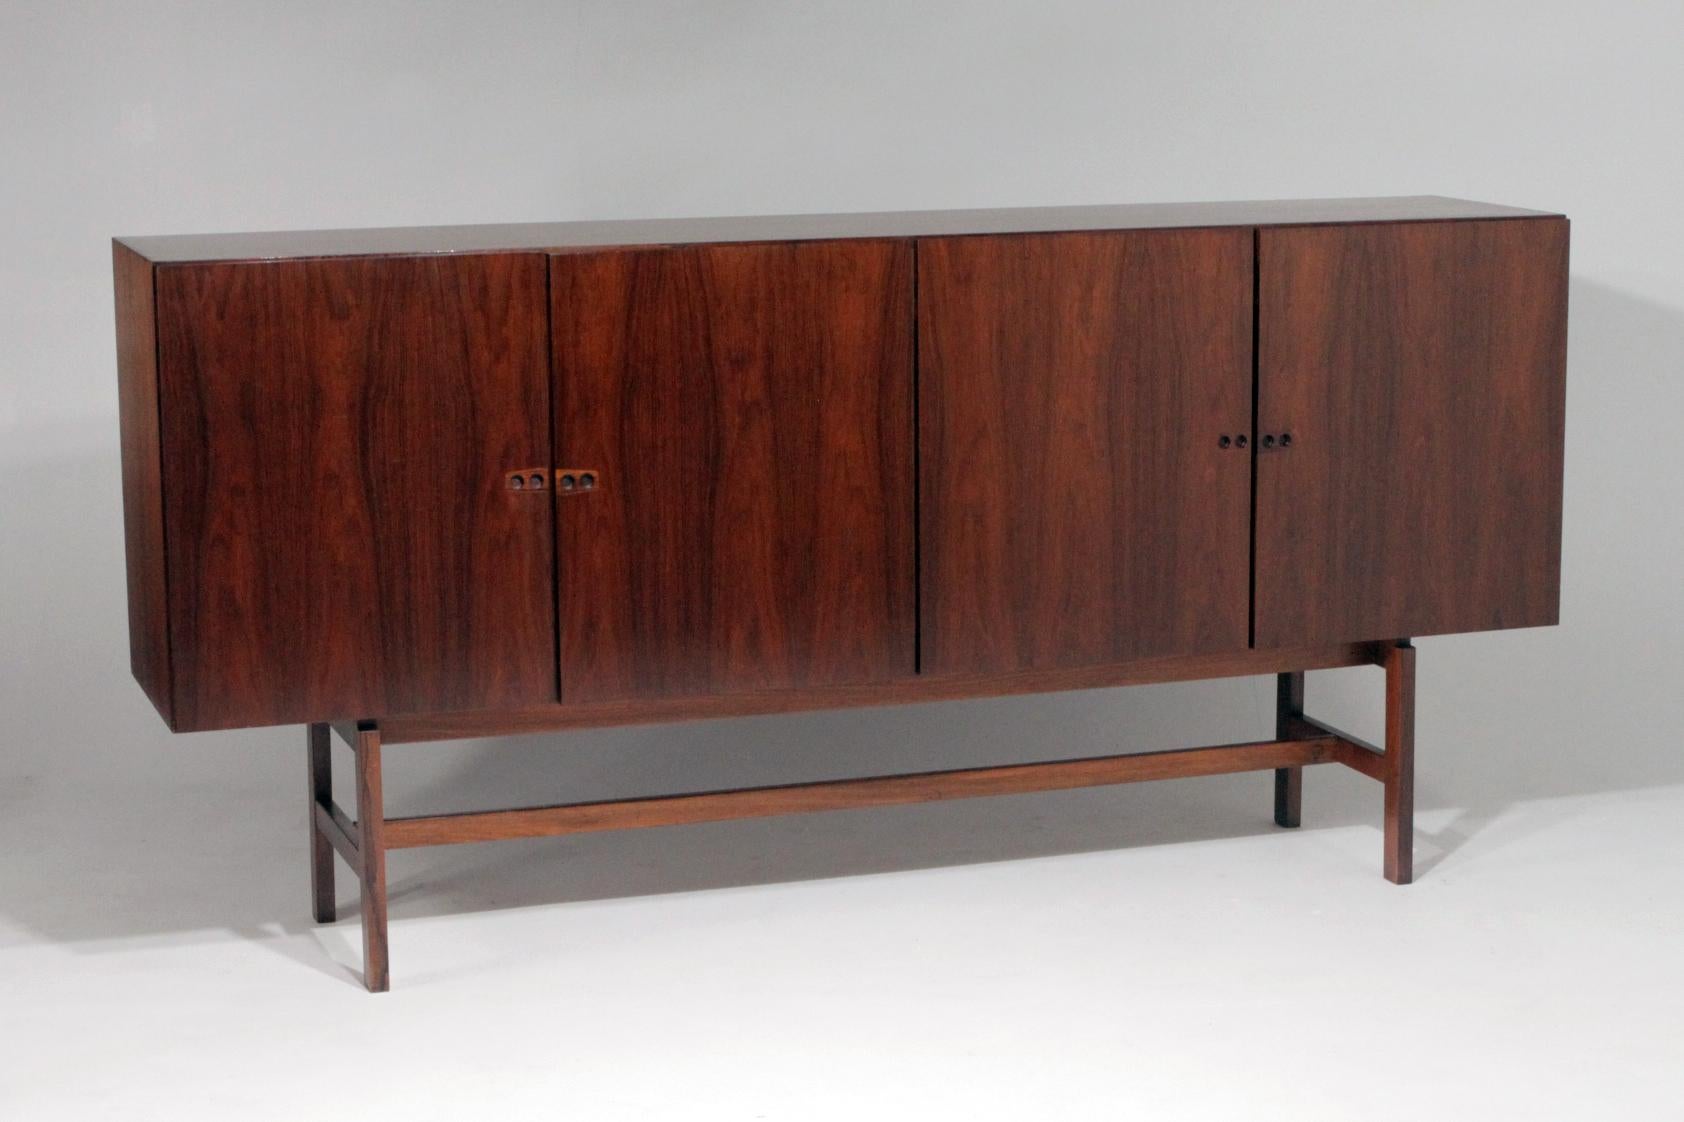 An incredibly well made rosewood credenza by an unknown Danish maker. Book matched rosewood top, sides and doors, inside and out, and the detail on the inside of the doors is as impressive as on the outside. Brass hinges, felt lined drawers,